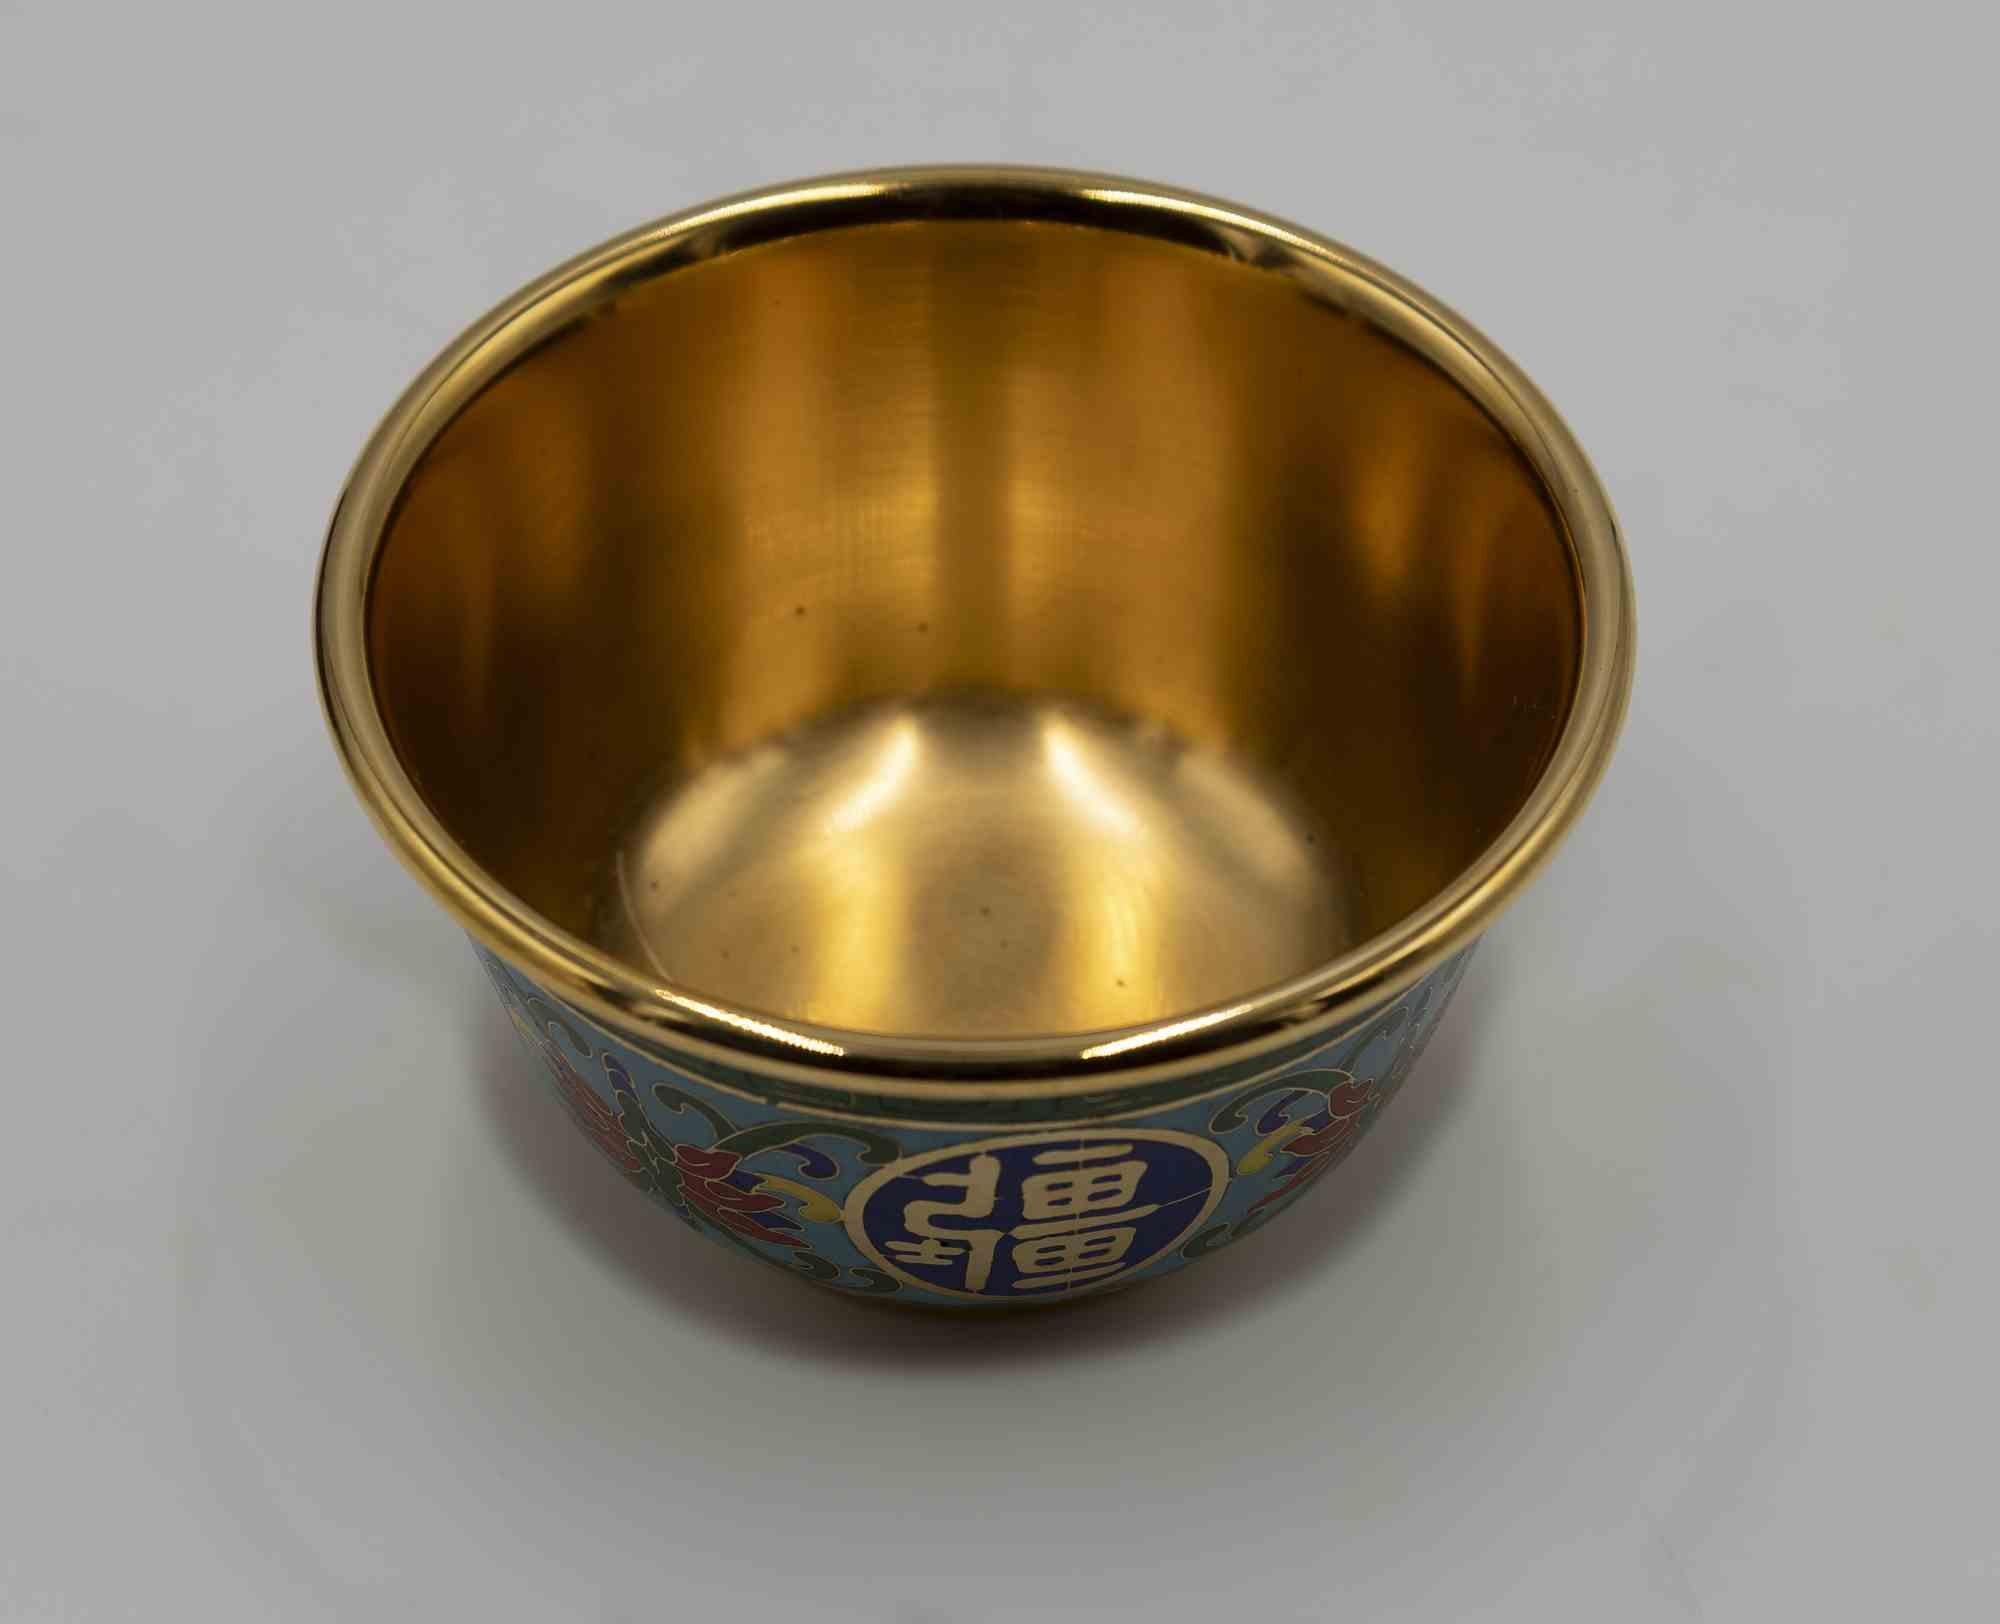 Chinese cup in golden metal.

Enamel exterior.

High quality workmanship.

10 x 7 cm.

1990s